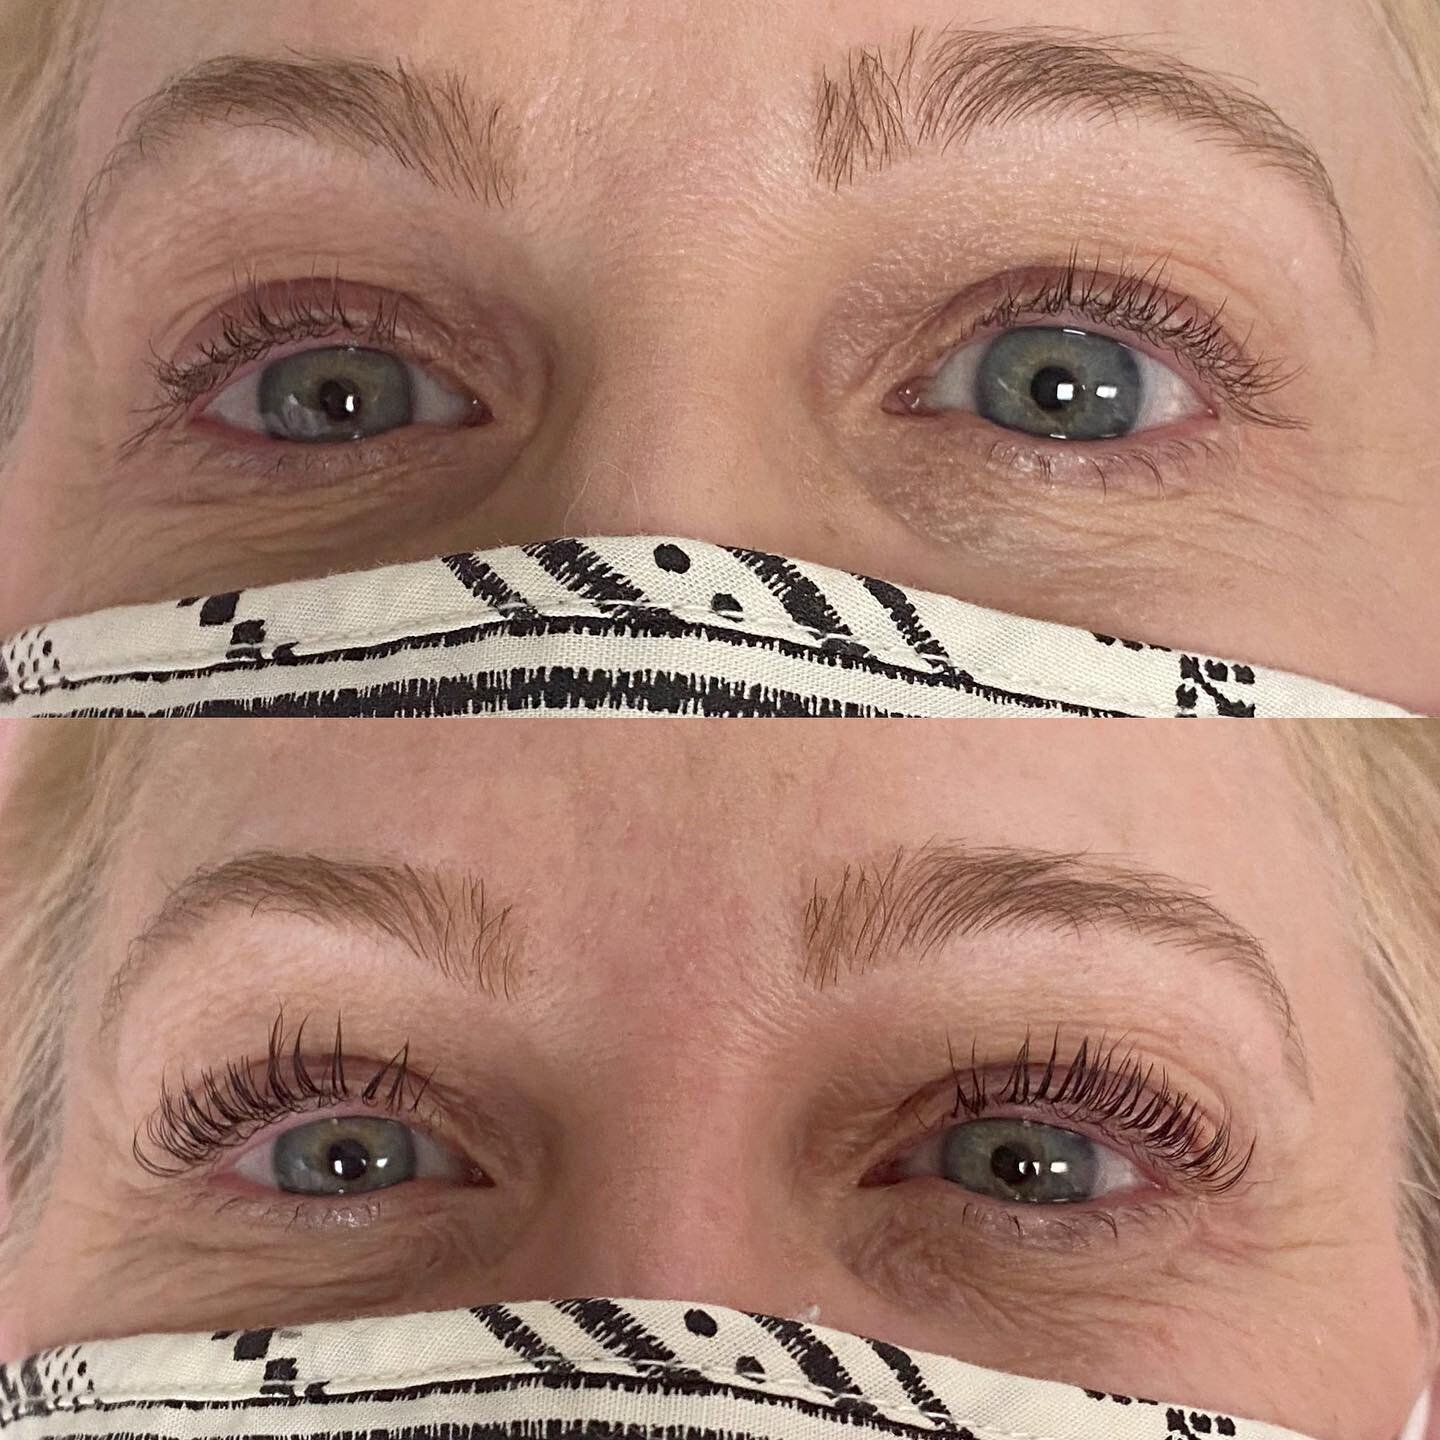 Lash Lifts have becoming a VERY popular service for 2020.  Here&rsquo;s why....

No mascara, no damaging eyelash curler, and no eyelash extensions! 

These are her natural lashes with a Lift &amp; Tint! W😮W what a difference! 

🤷🏼&zwj;♀️ How long 